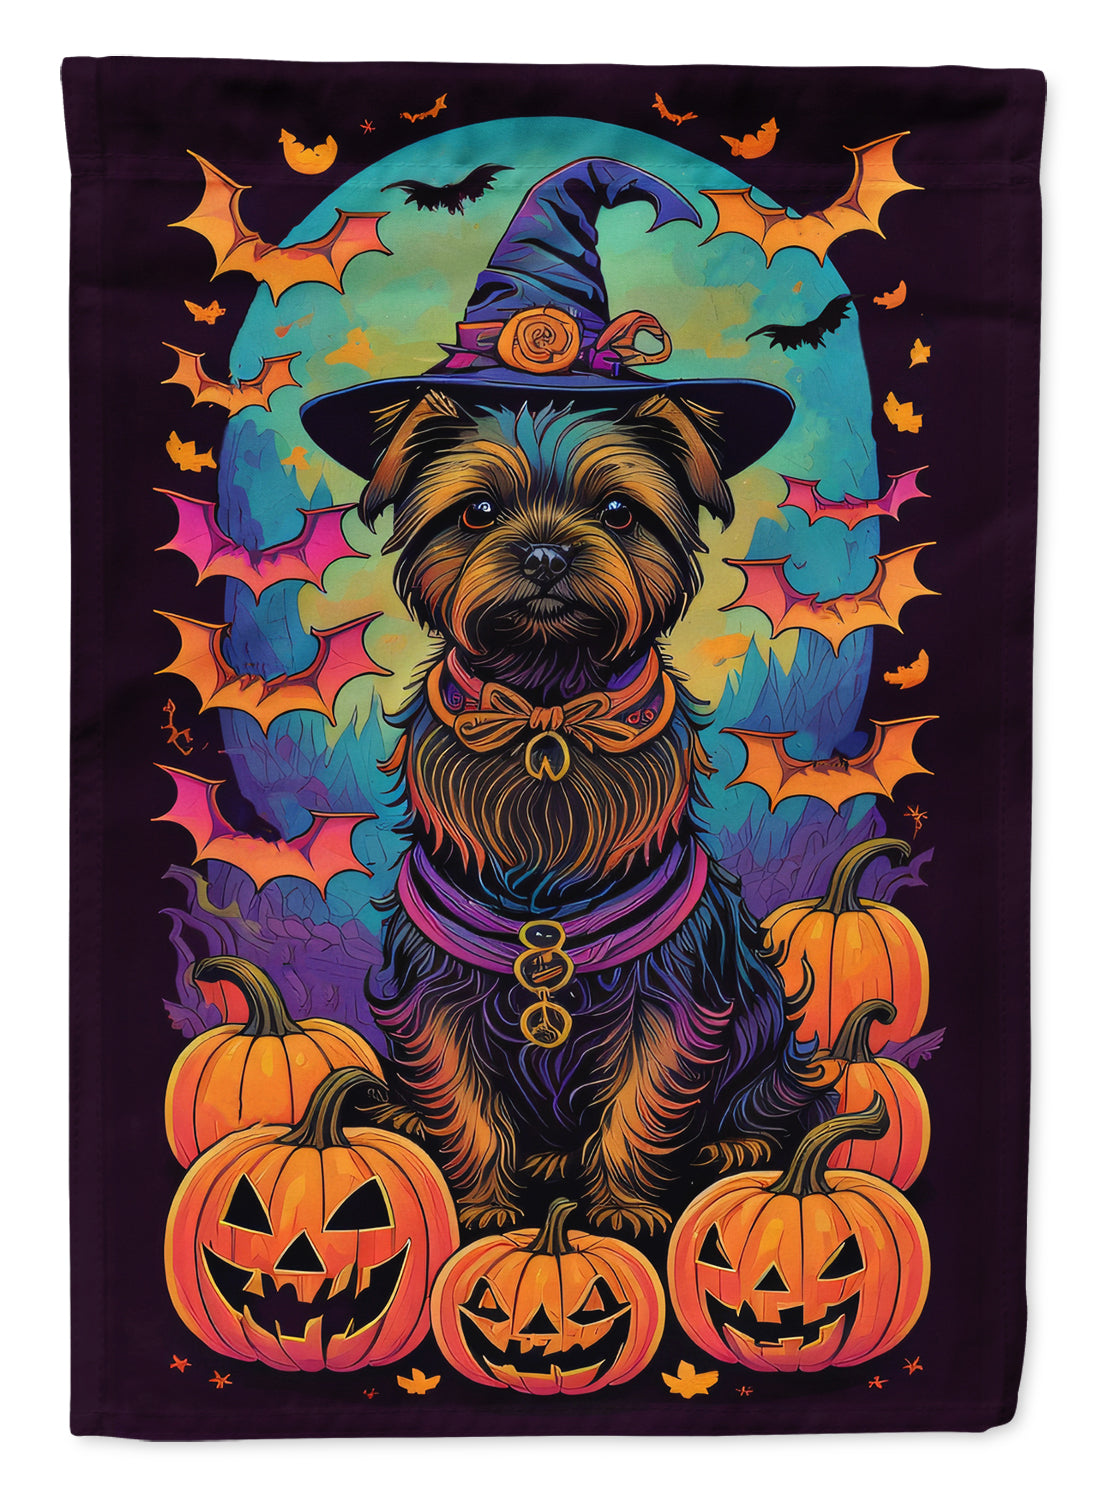 Buy this Cairn Terrier Witchy Halloween Garden Flag